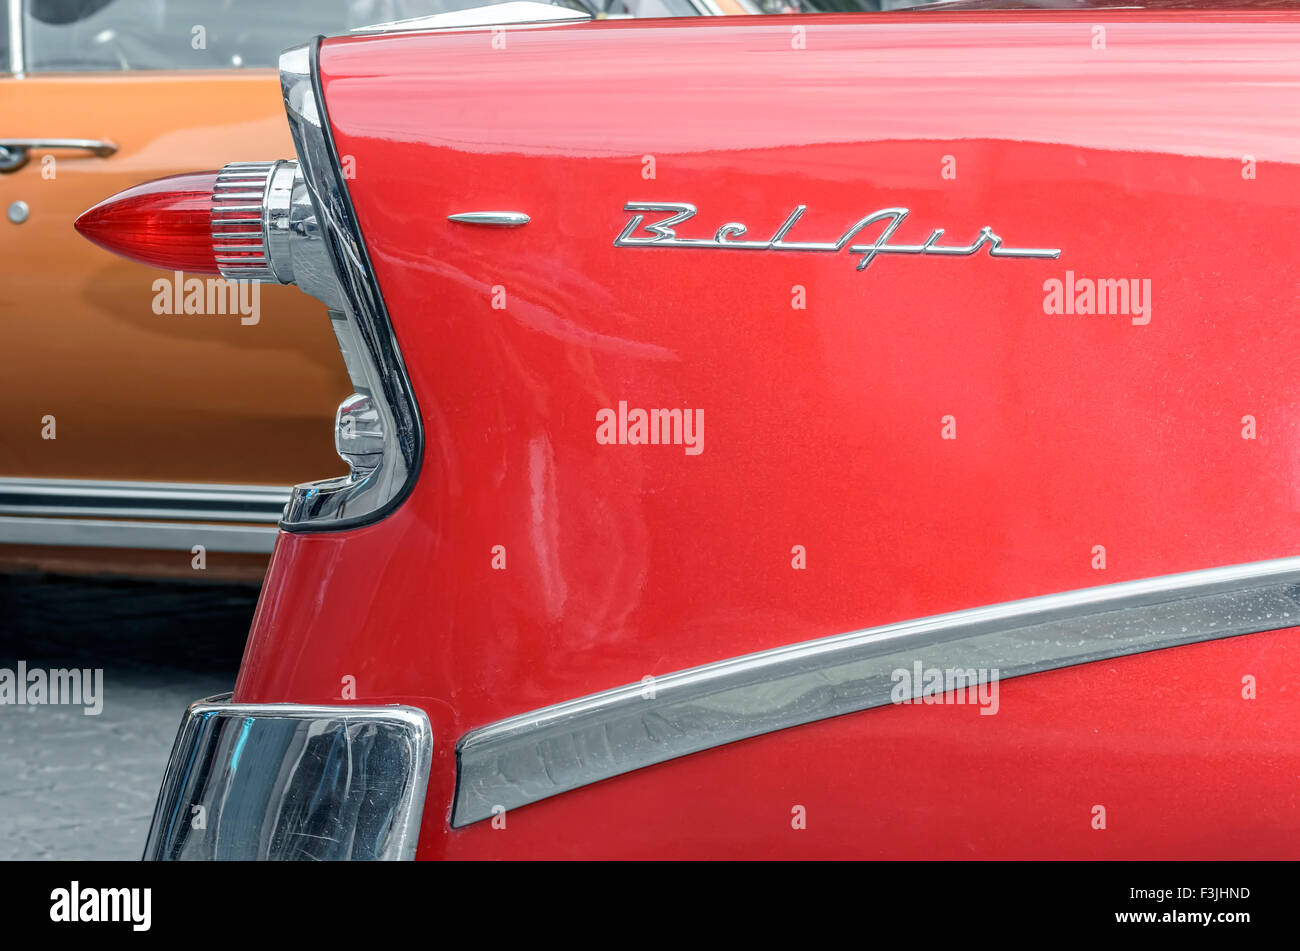 Meeting of classic american cars. Rear headlight of Chevrolet Bel Air, of 1957. Stock Photo